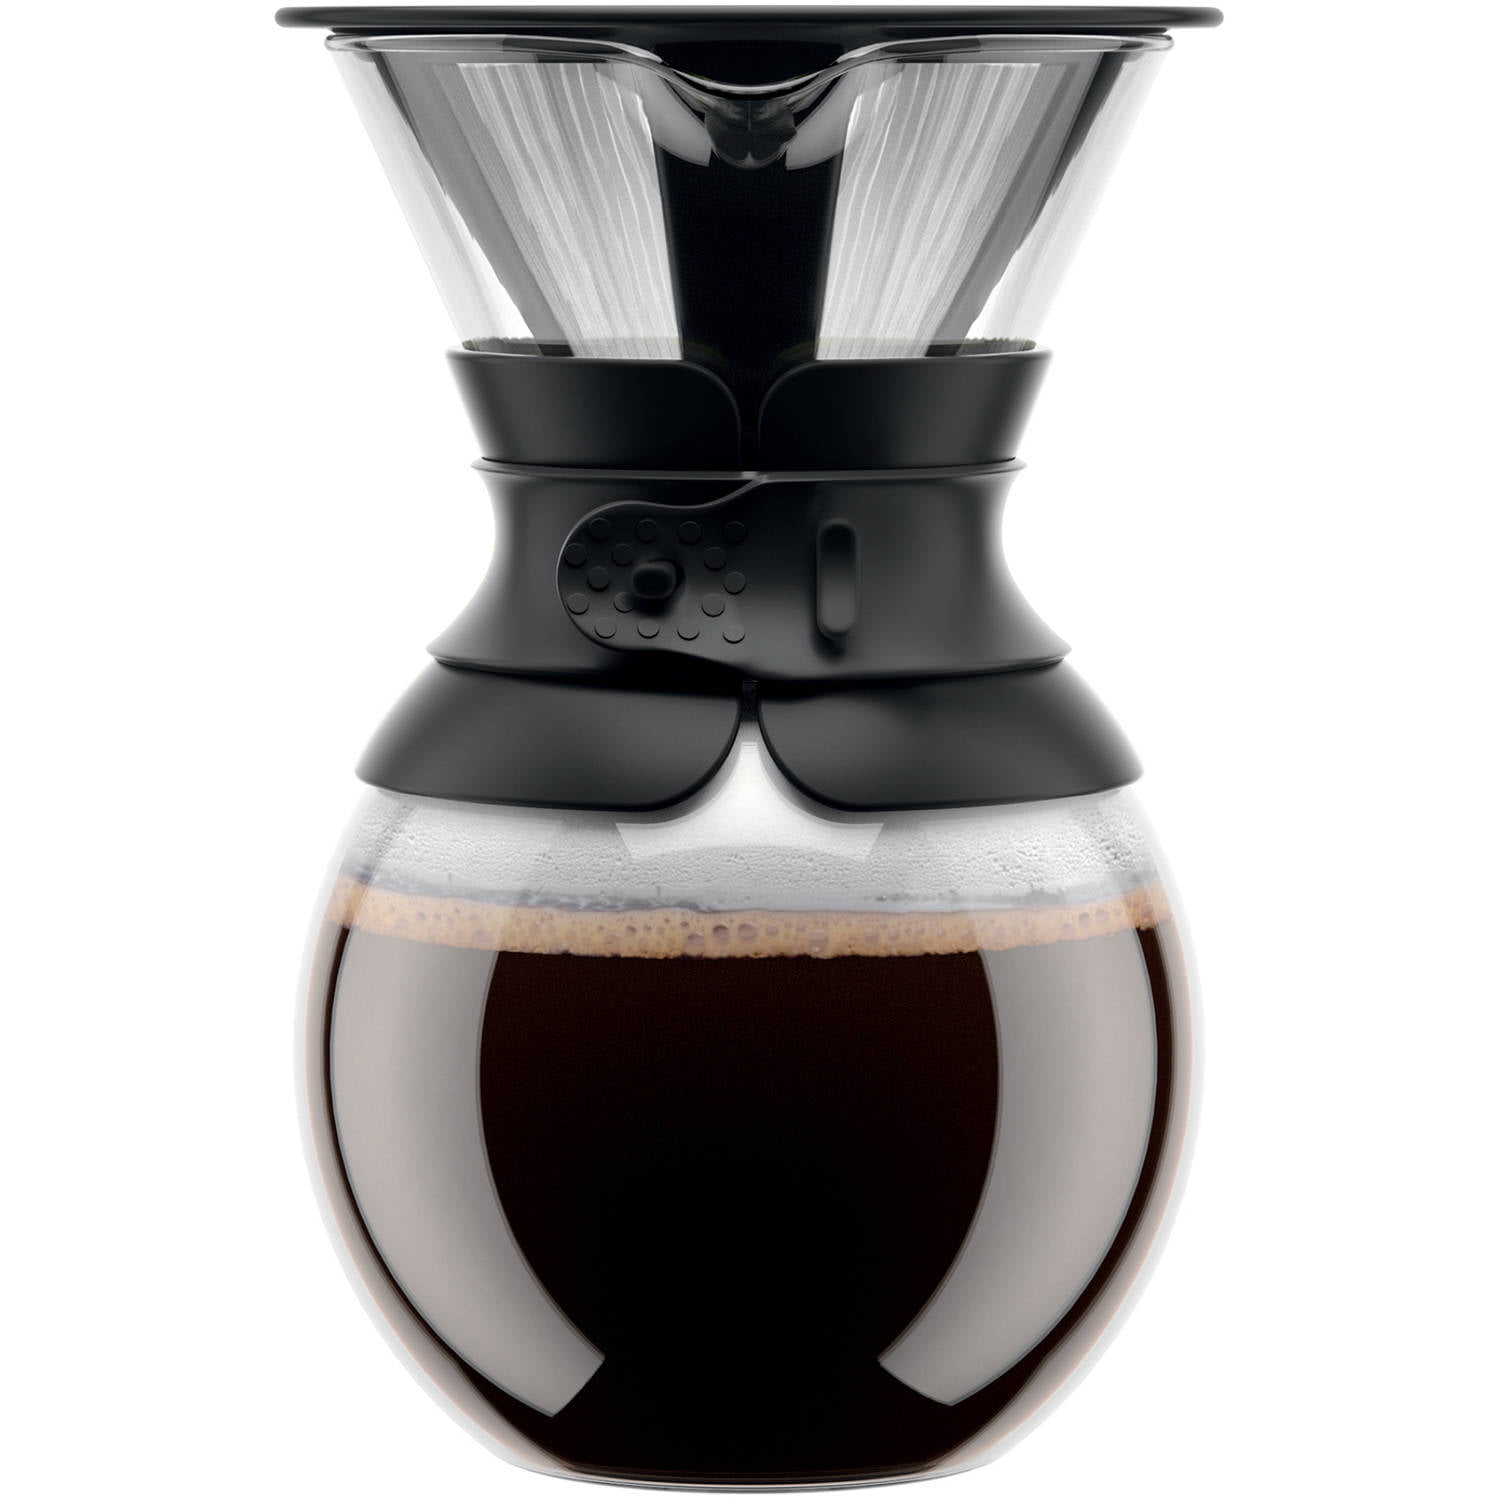 Bodum Pour Over Coffee Maker 8 Cup, Double Wall Cork